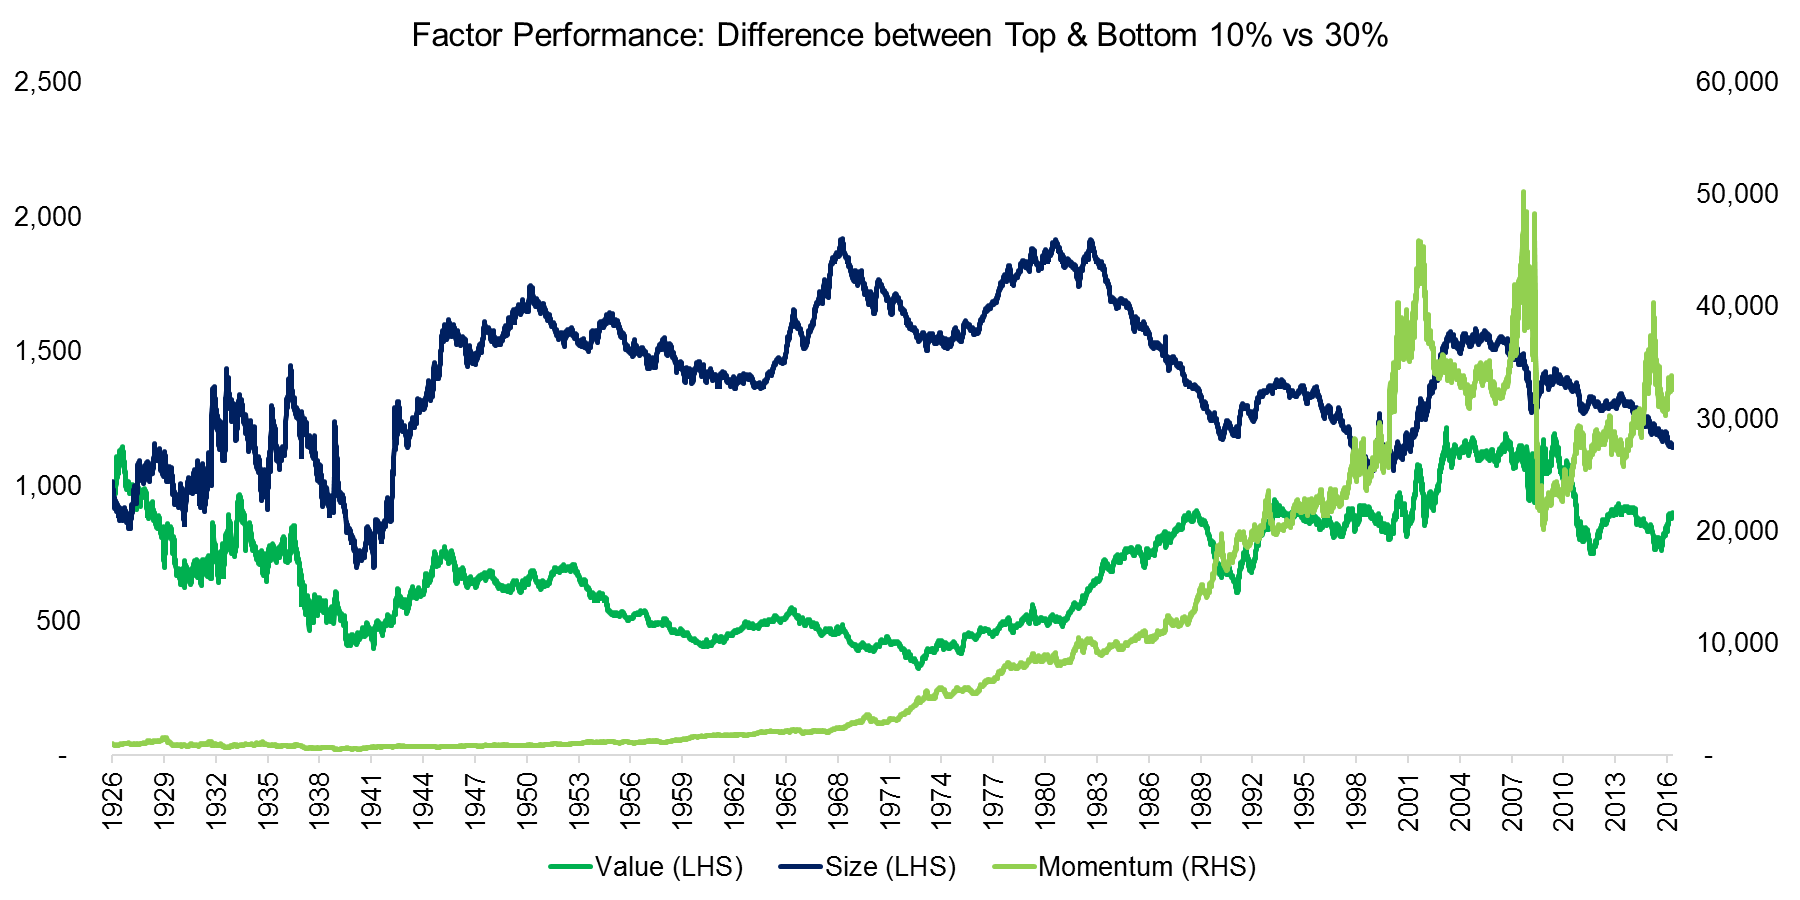 Factor Performance Difference between Top & Bottom 10% vs 30%